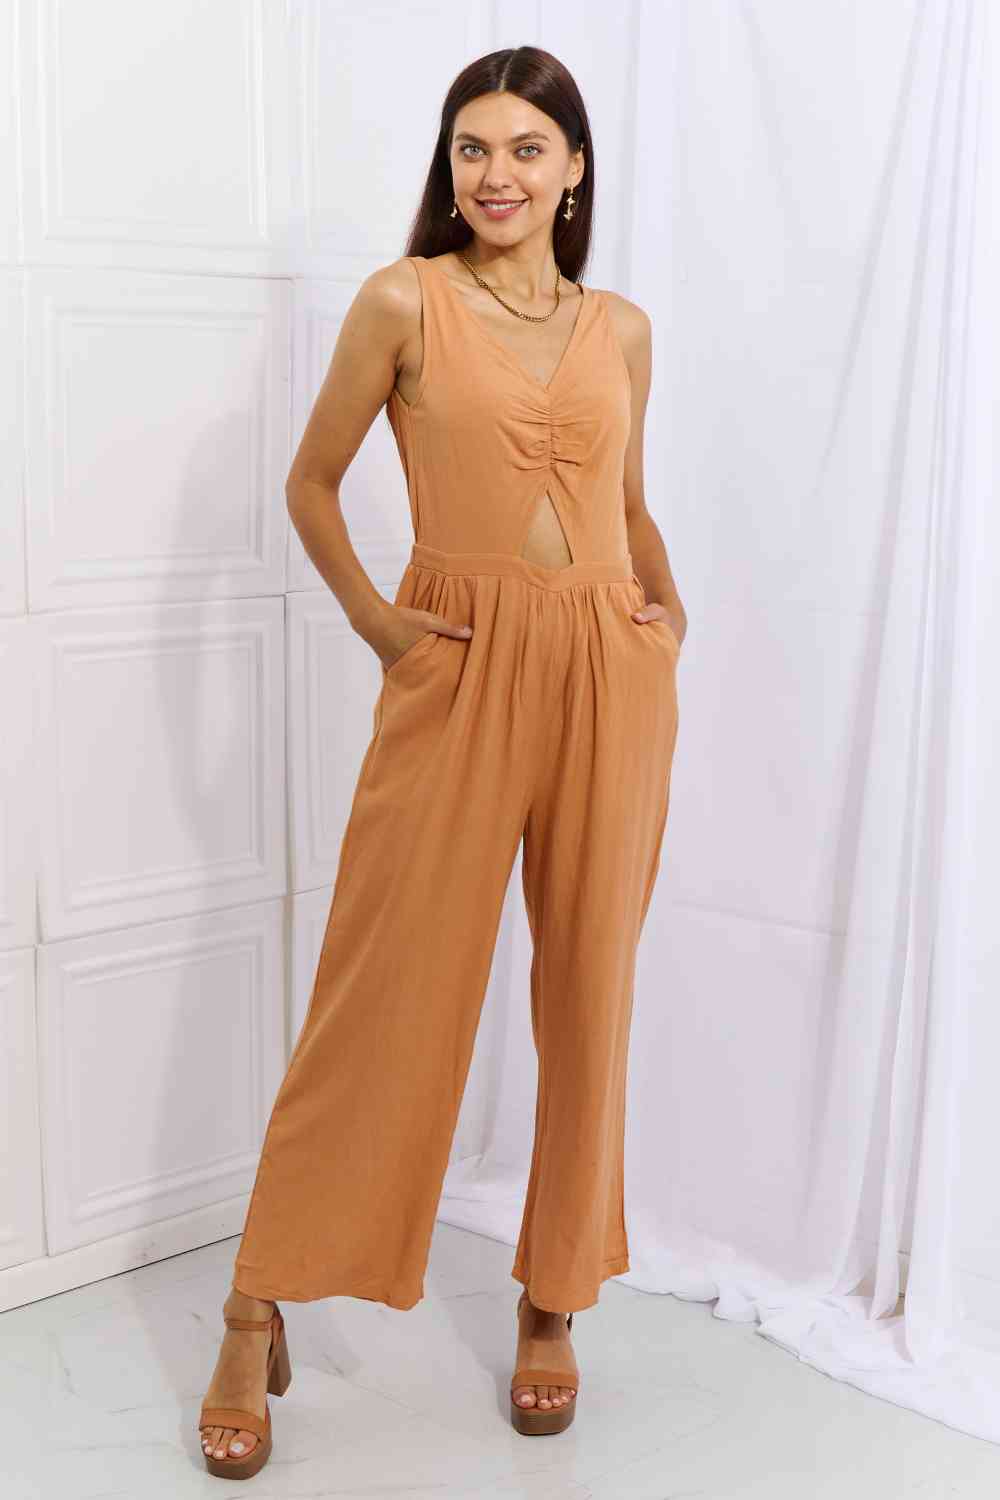 Trendsi Trends jumpsuit with mid cutout and pockets. Wide leg, V-neck is sleeveless for comfort and slender look.